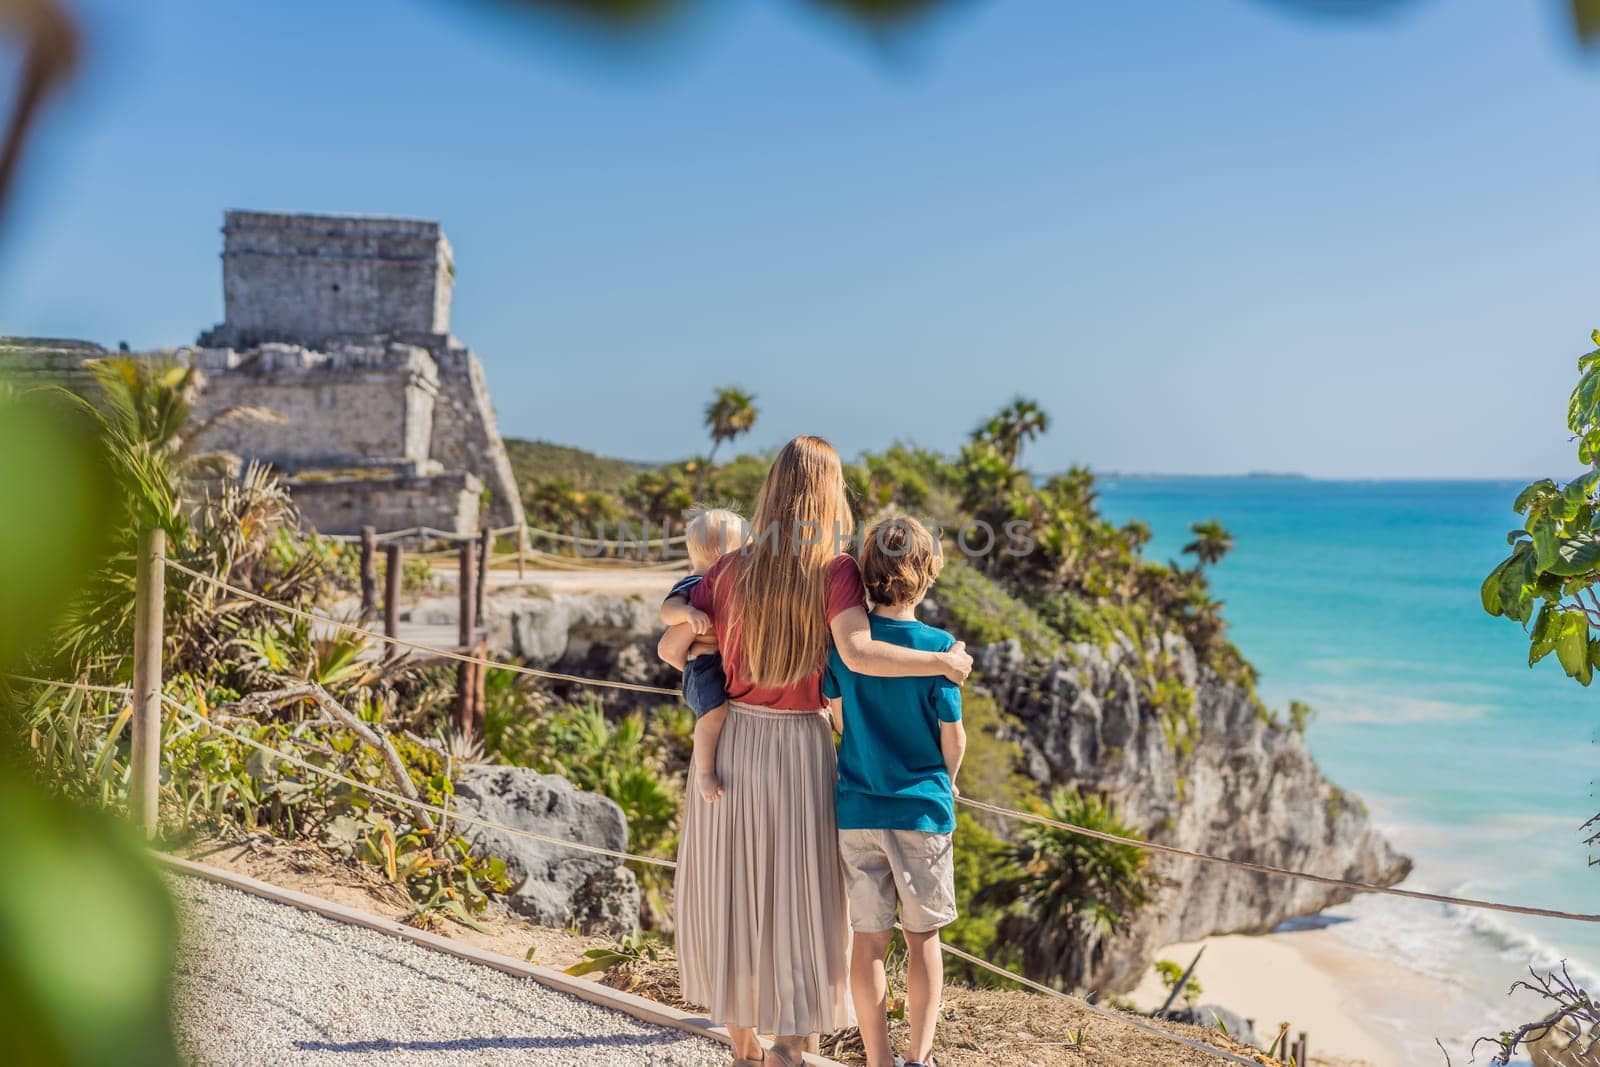 Mother and two sons tourists enjoying the view Pre-Columbian Mayan walled city of Tulum, Quintana Roo, Mexico, North America, Tulum, Mexico. El Castillo - castle the Mayan city of Tulum main temple by galitskaya